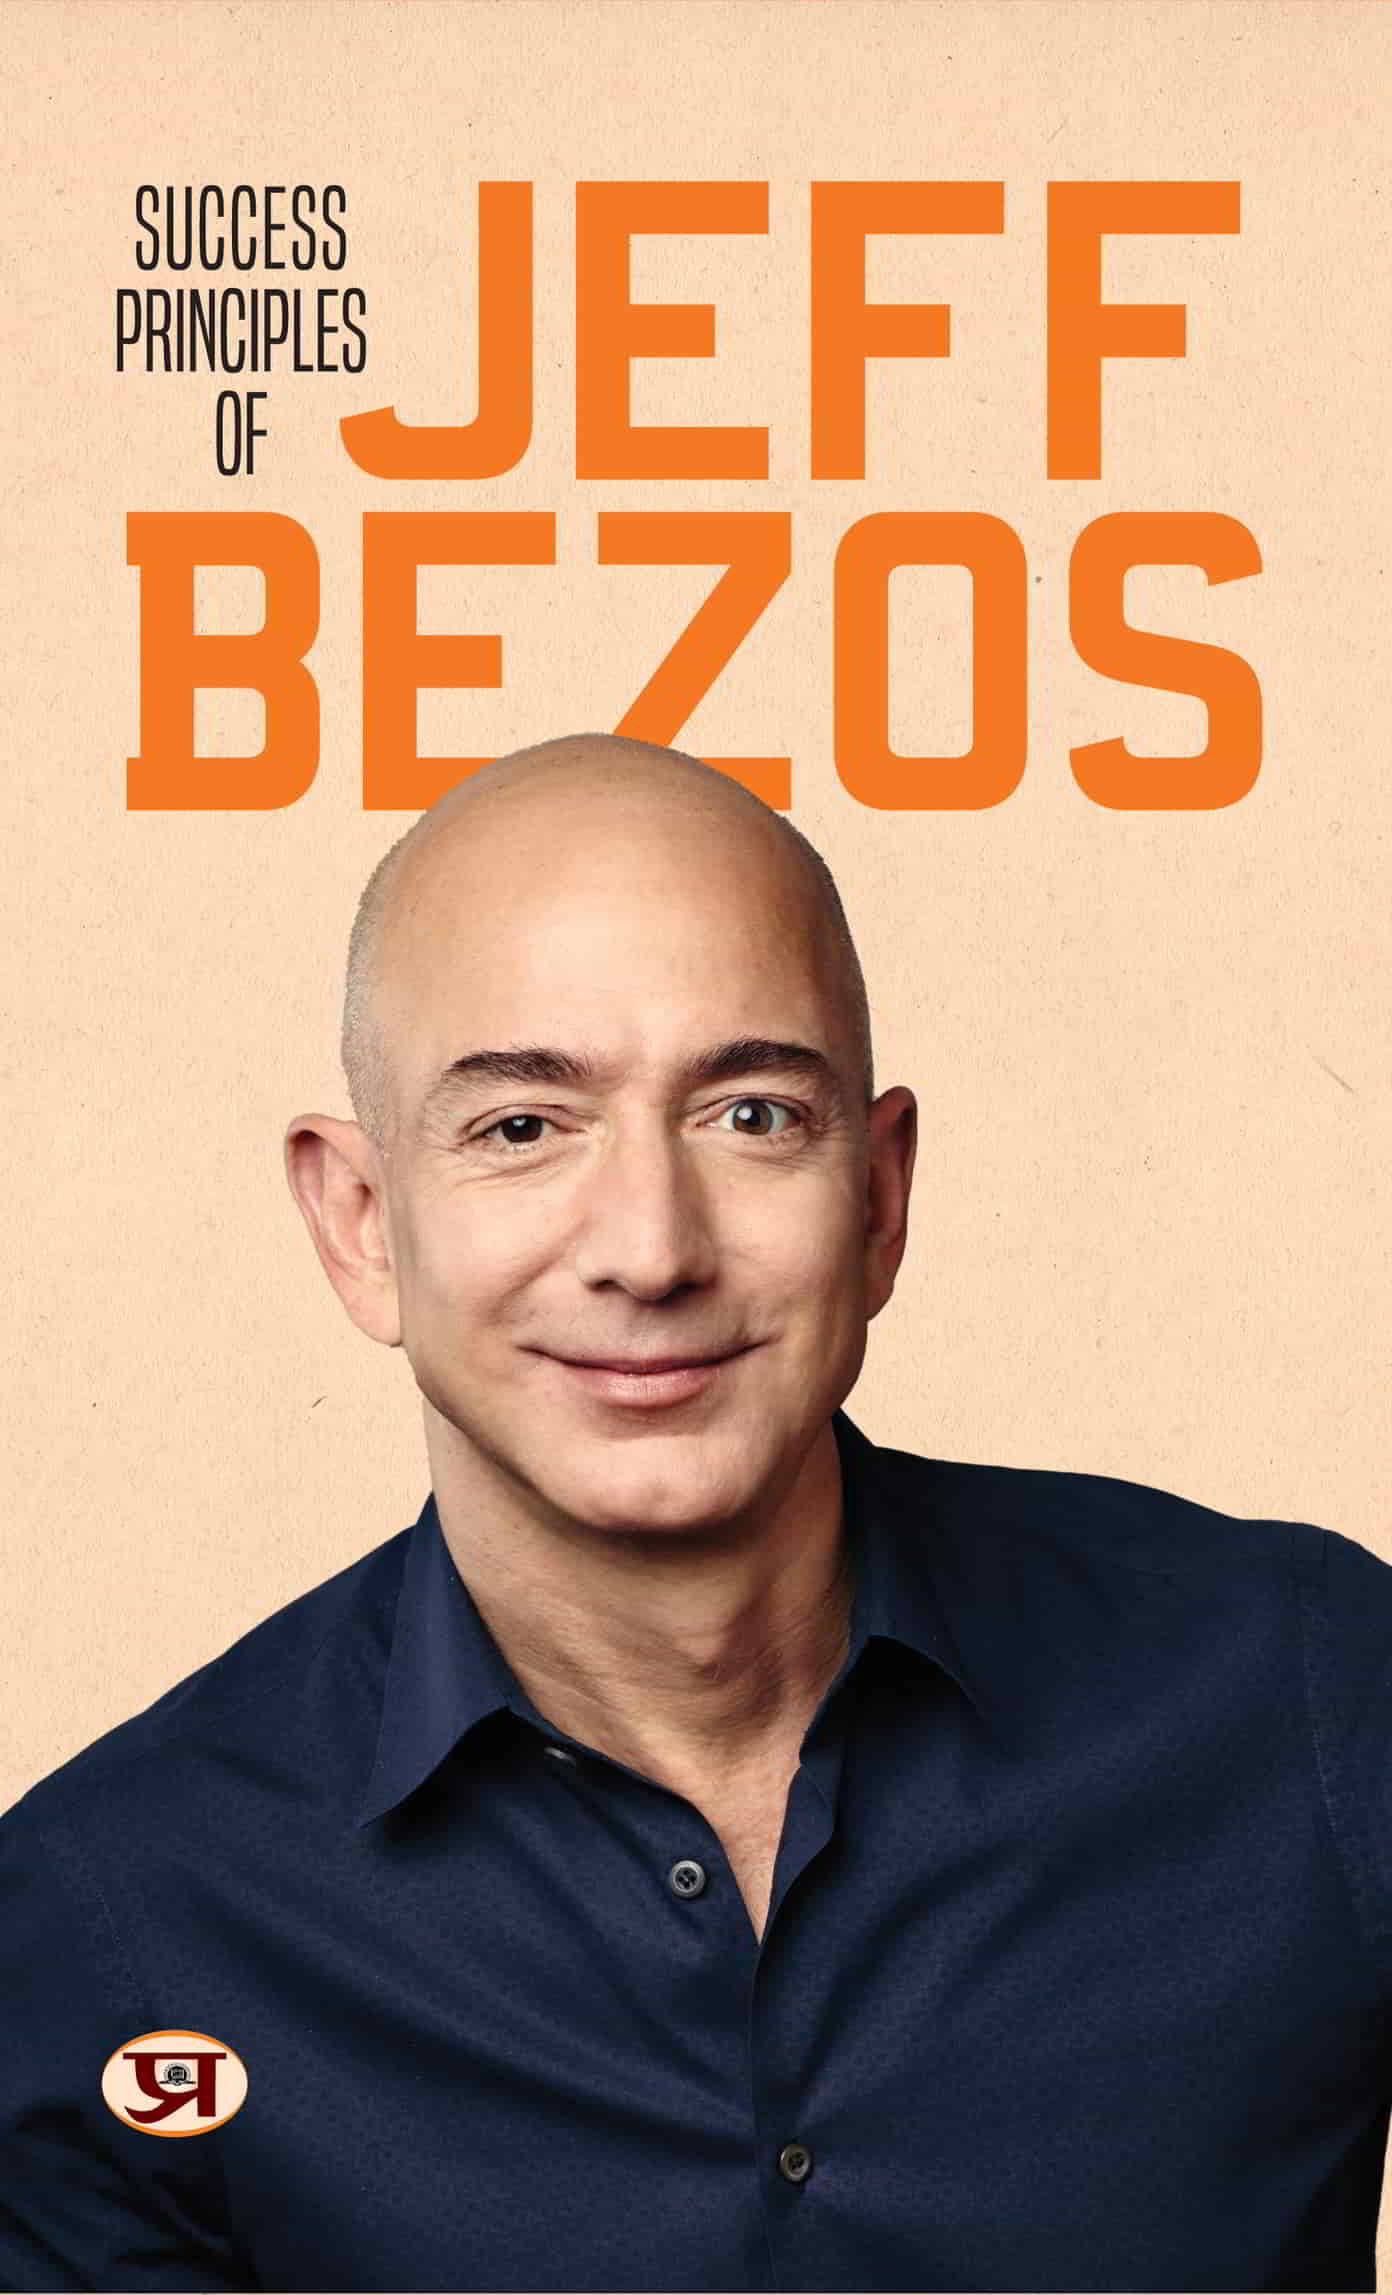 Success Principles of Jeff Bezos | Best Quotes from The Great Entrepreneur: Amazon | Leadership Principles | Lessons & Rules For Success